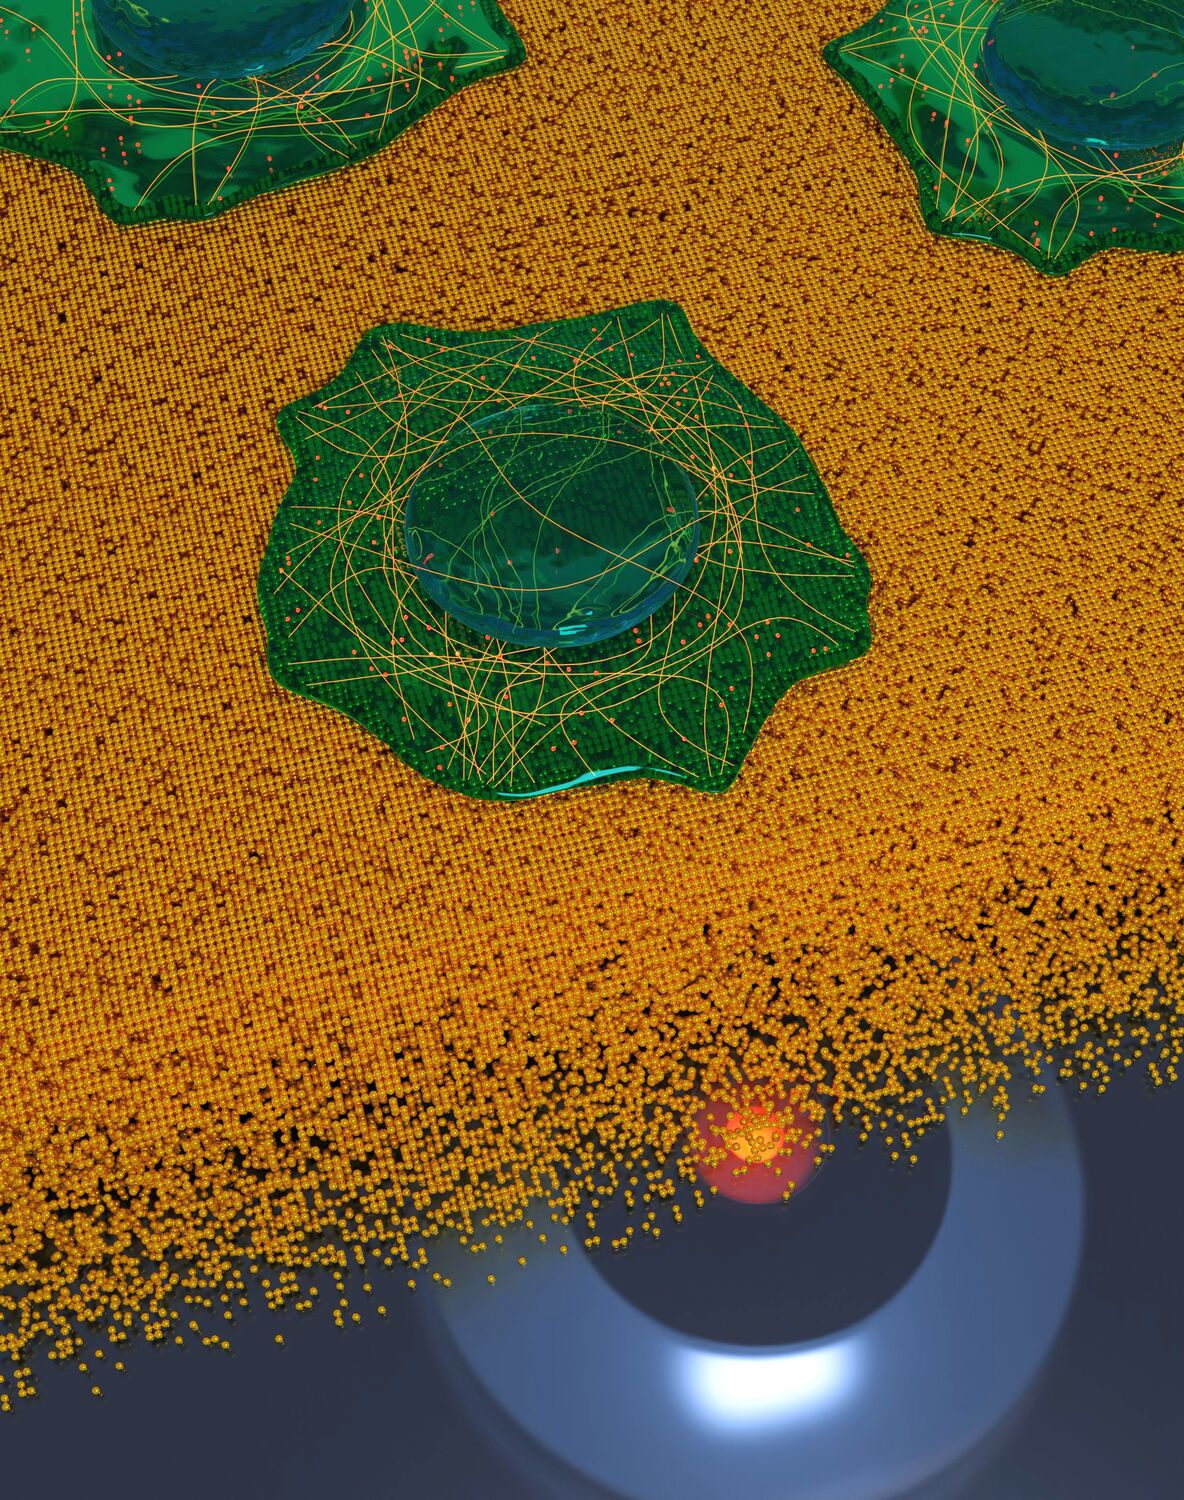 To show that 3D imaging with MIET-SMLM is compatible with biological samples, cells were seeded on a cover glass coated with 10 nm of gold and 5 nm of SiO2 using standard immunofluorescence sample prepa-ration procedure. The artistic rendering illustrates cells imaging on a gold surface resolving microtubules network and clathrin coated pits.